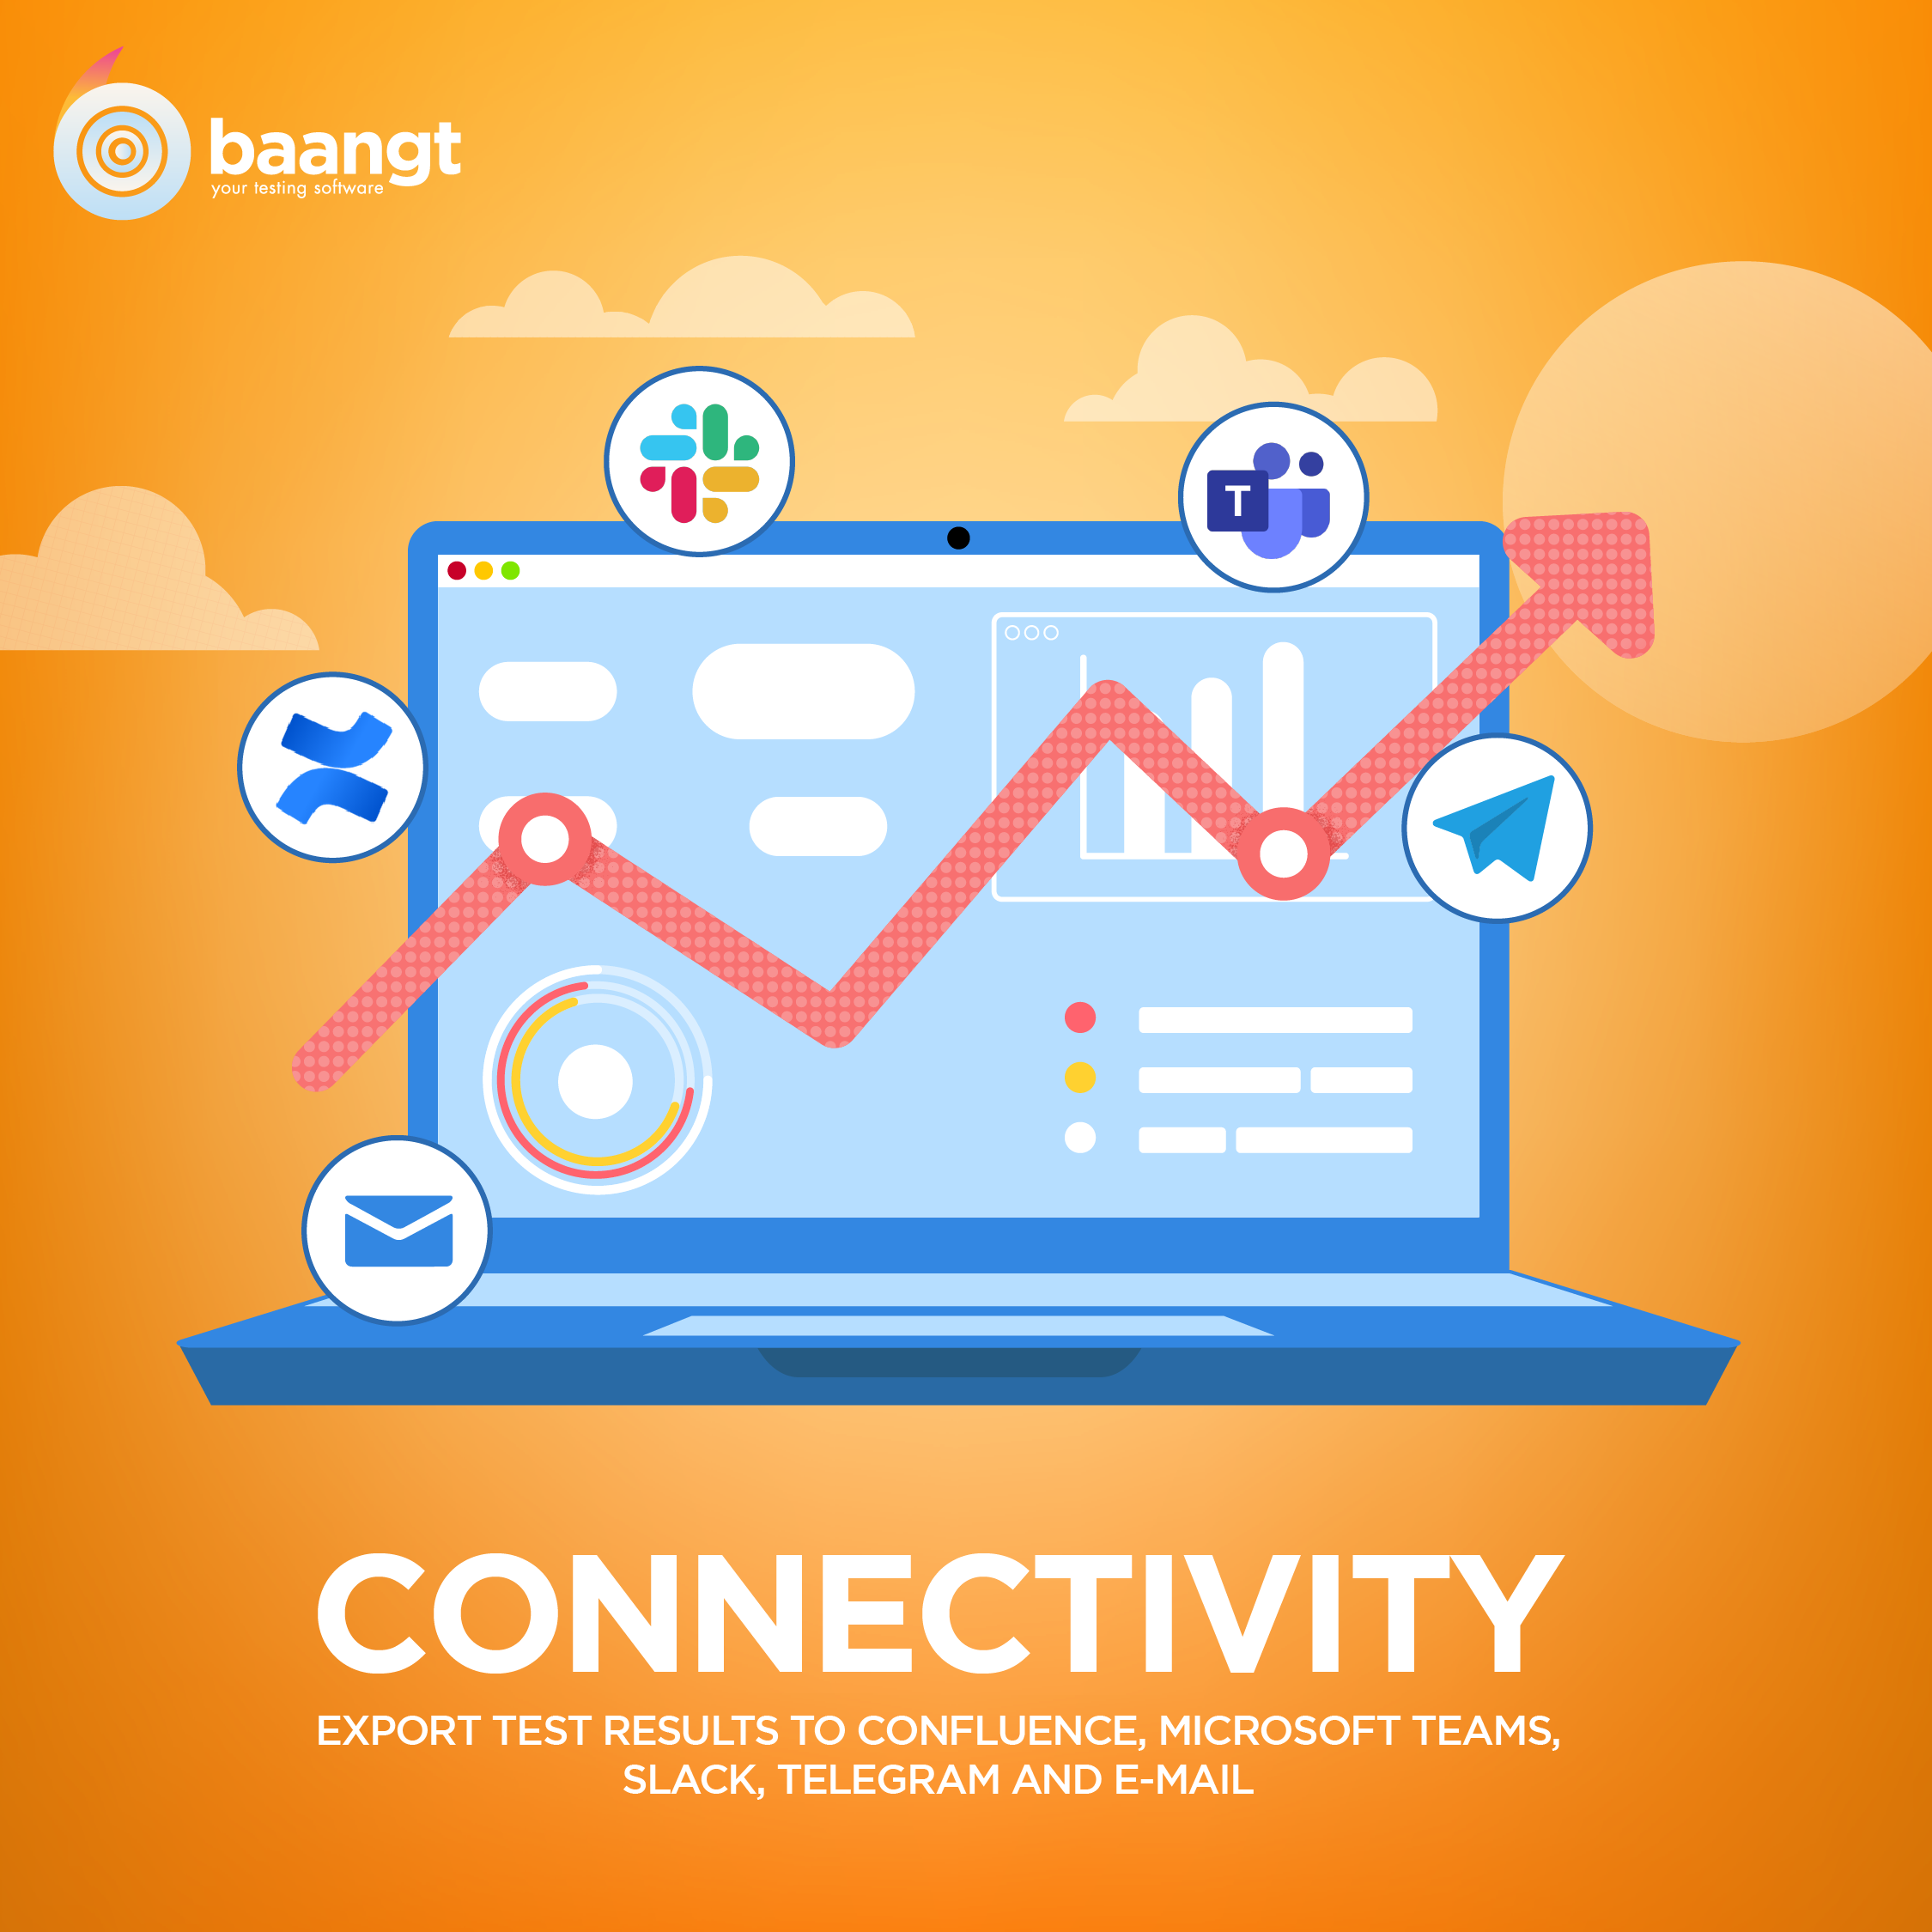 Connectivity in baangt - your favorite test automation software